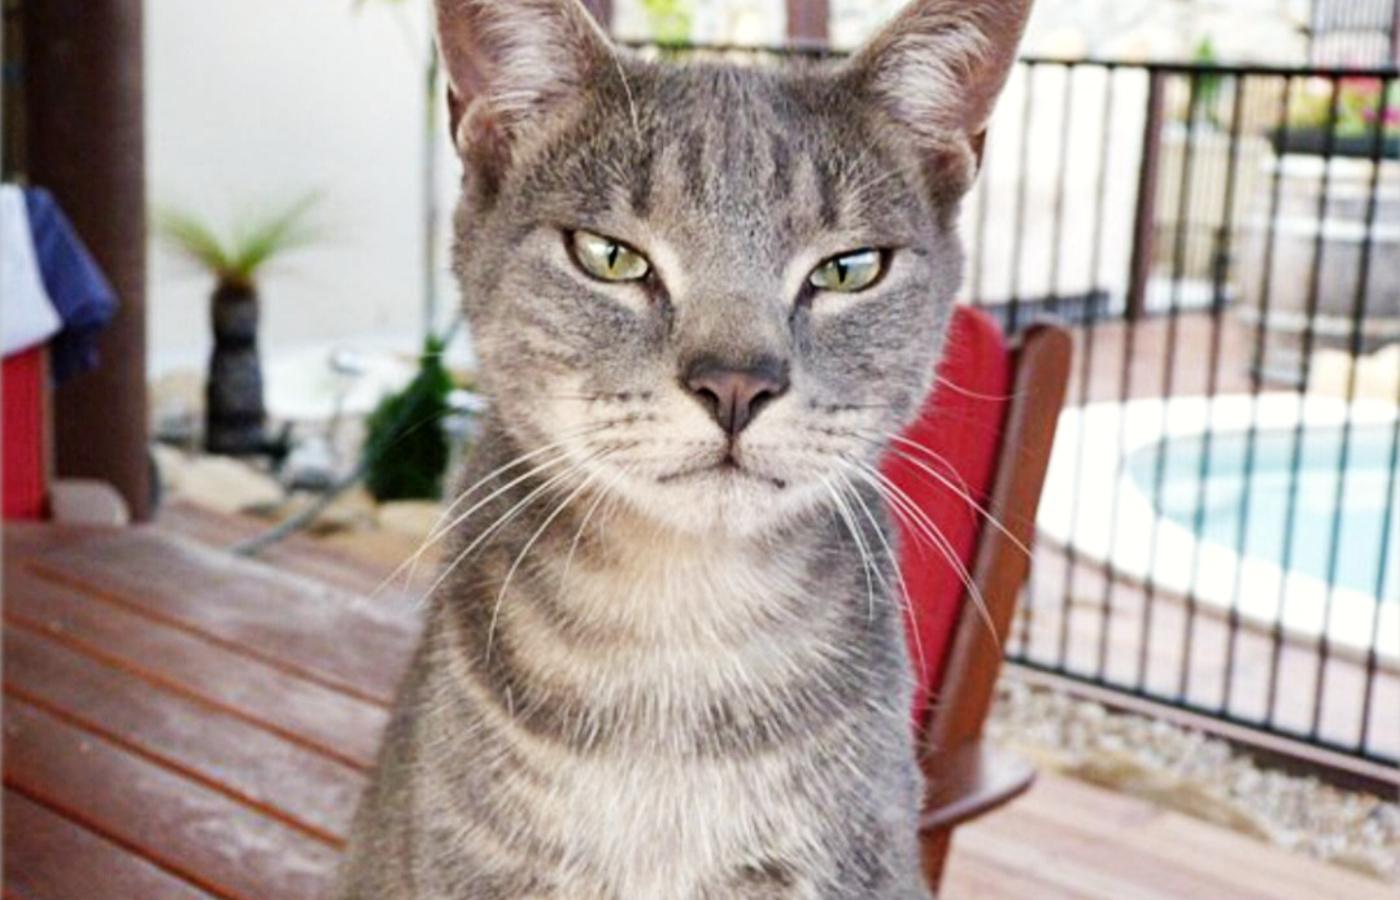 Melvin was found on May 23 after a member of the public reported their concerns for a stray cat that had been visiting their house since Christmas. 